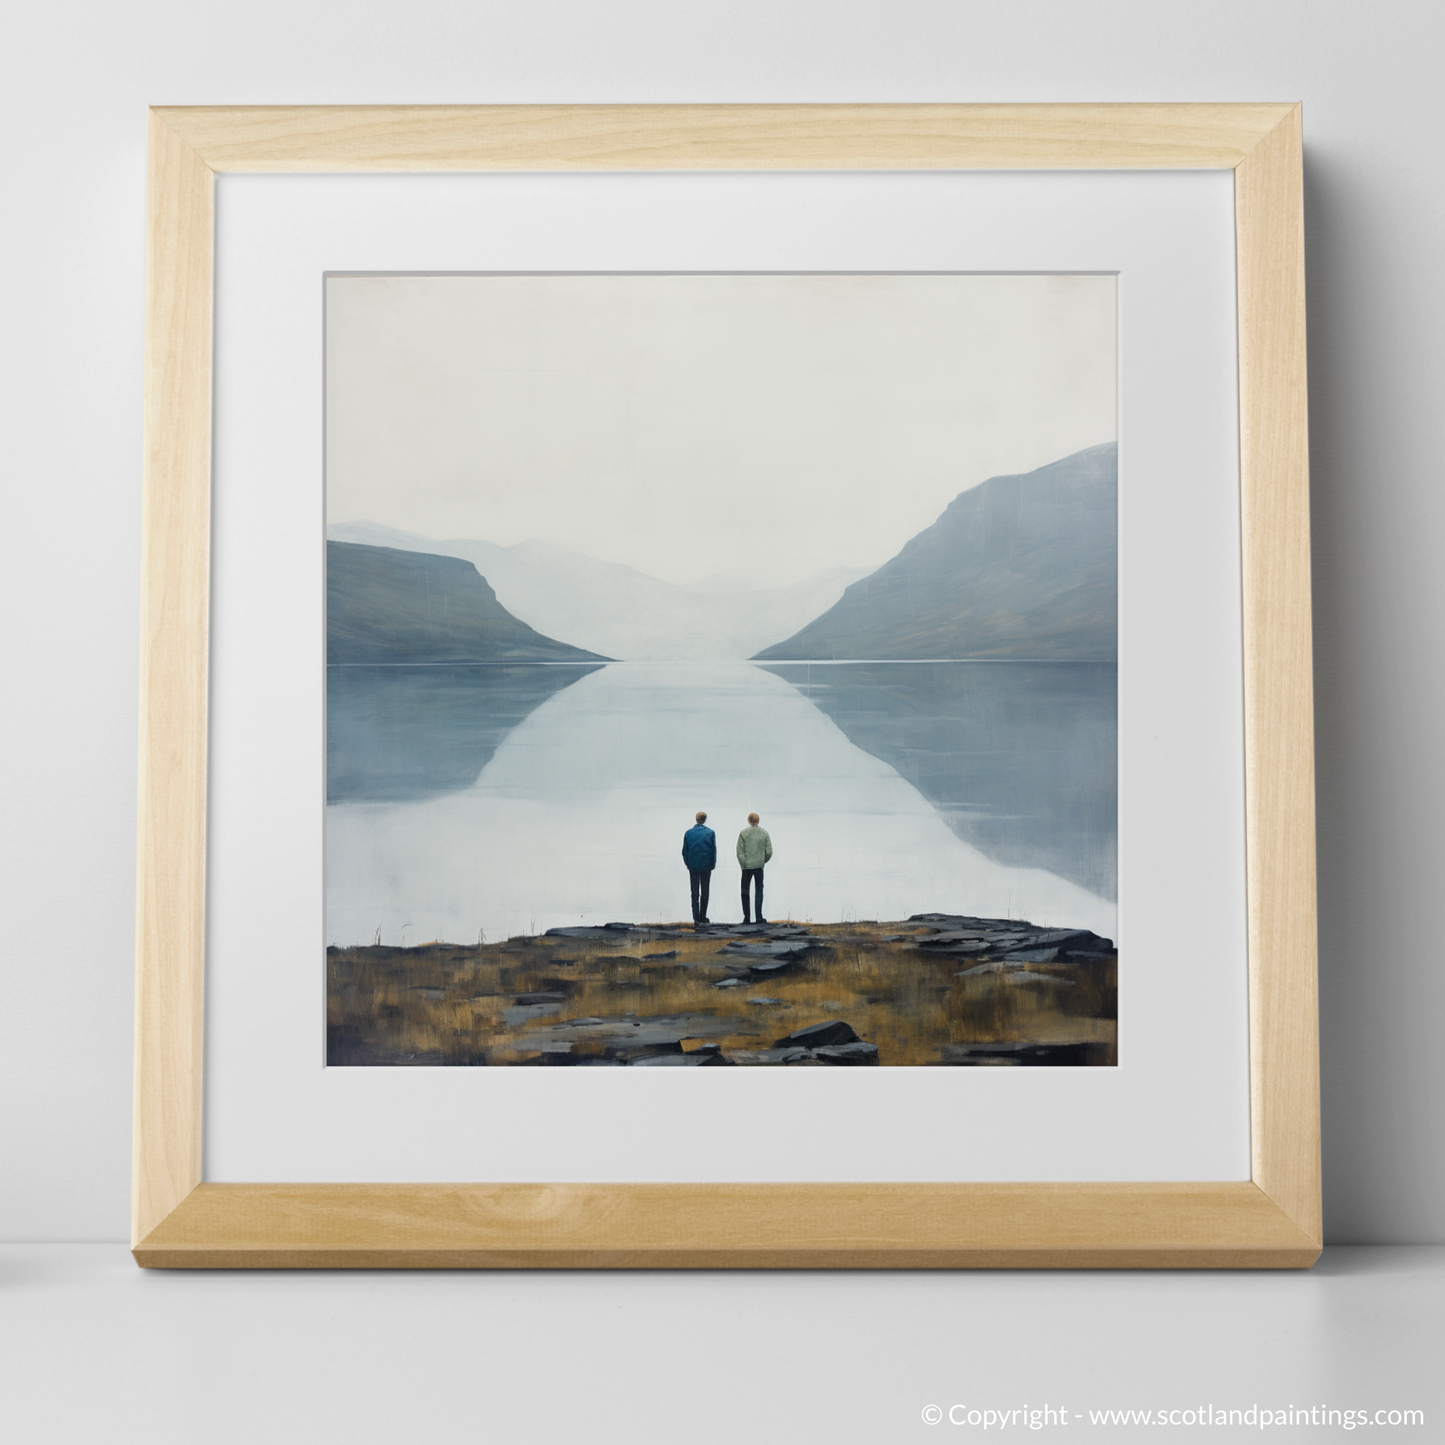 Painting and Art Print of Two hikers looking out on Loch Lomond. Minimalist Majesty: Hikers at Loch Lomond.